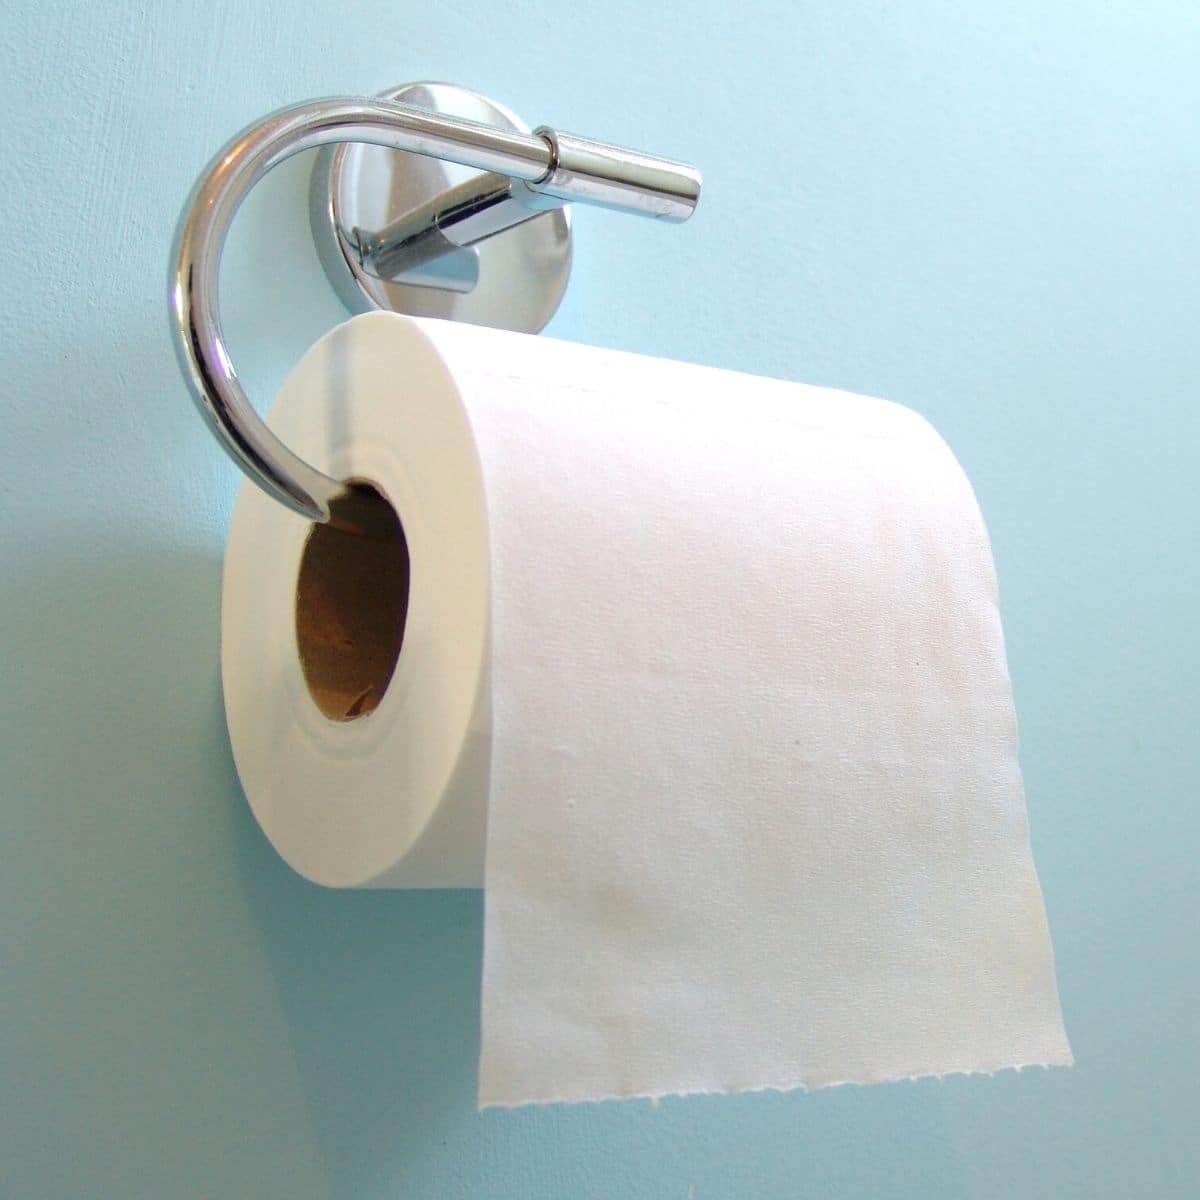 Toilet paper roll on a holder.